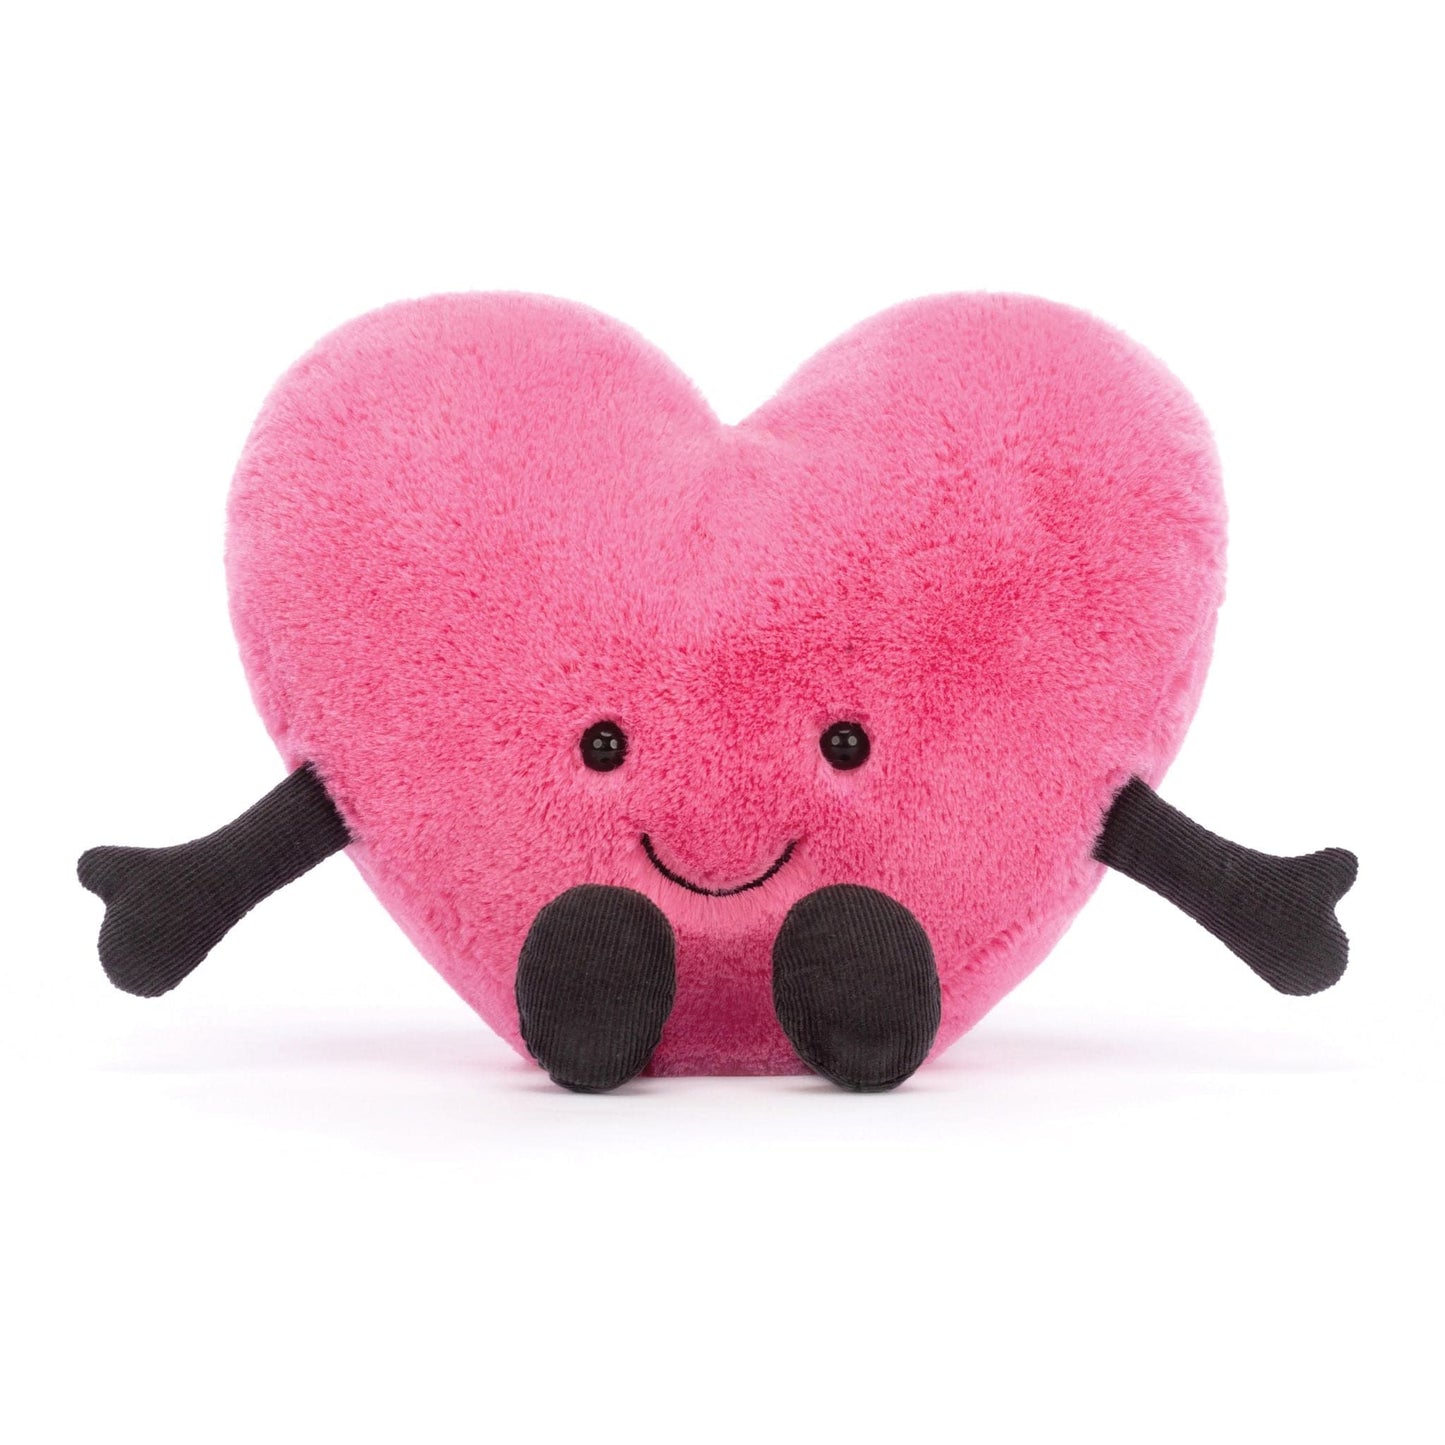 Jellycat Amuseable Hot Pink Heart